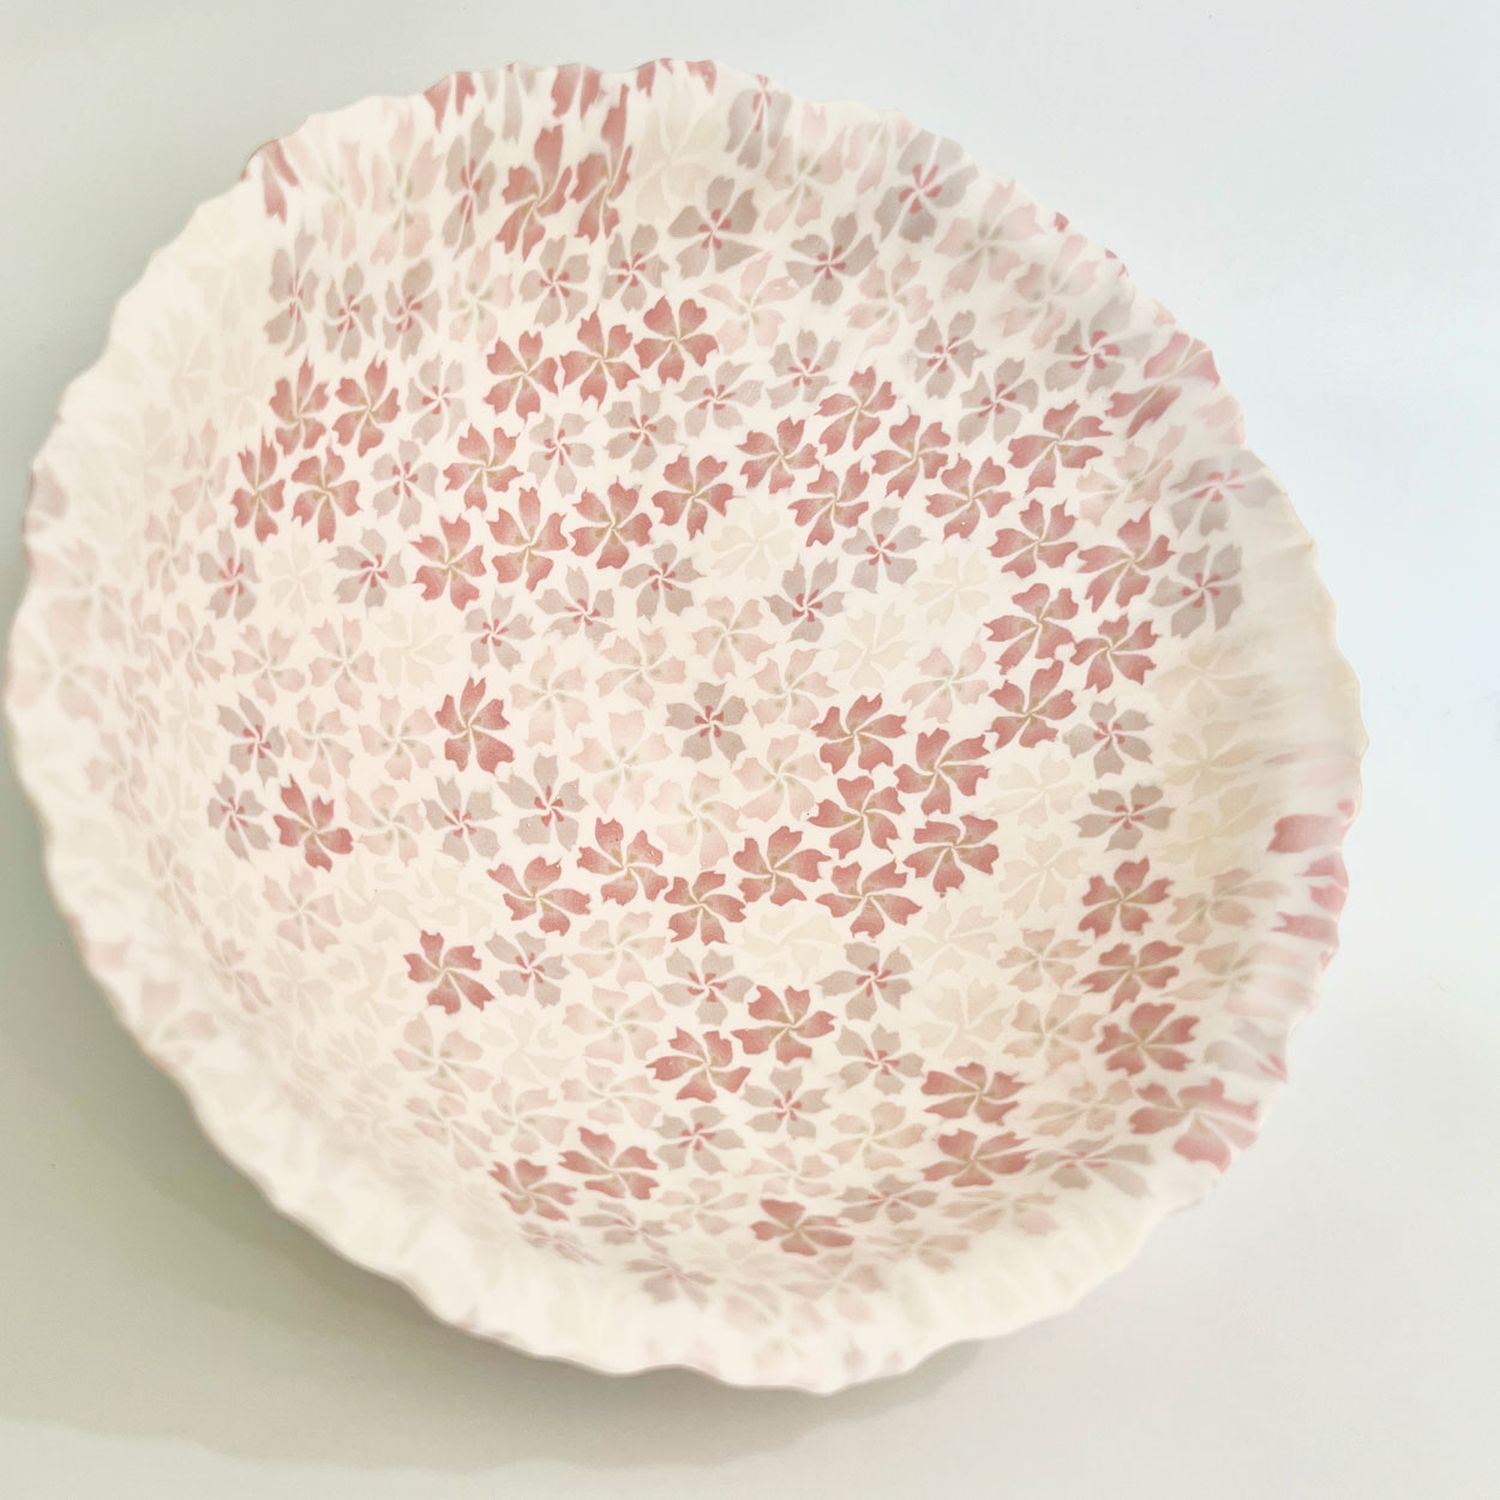 Eiko Maeda: Pink and Purple Floral Bowl Product Image 2 of 2